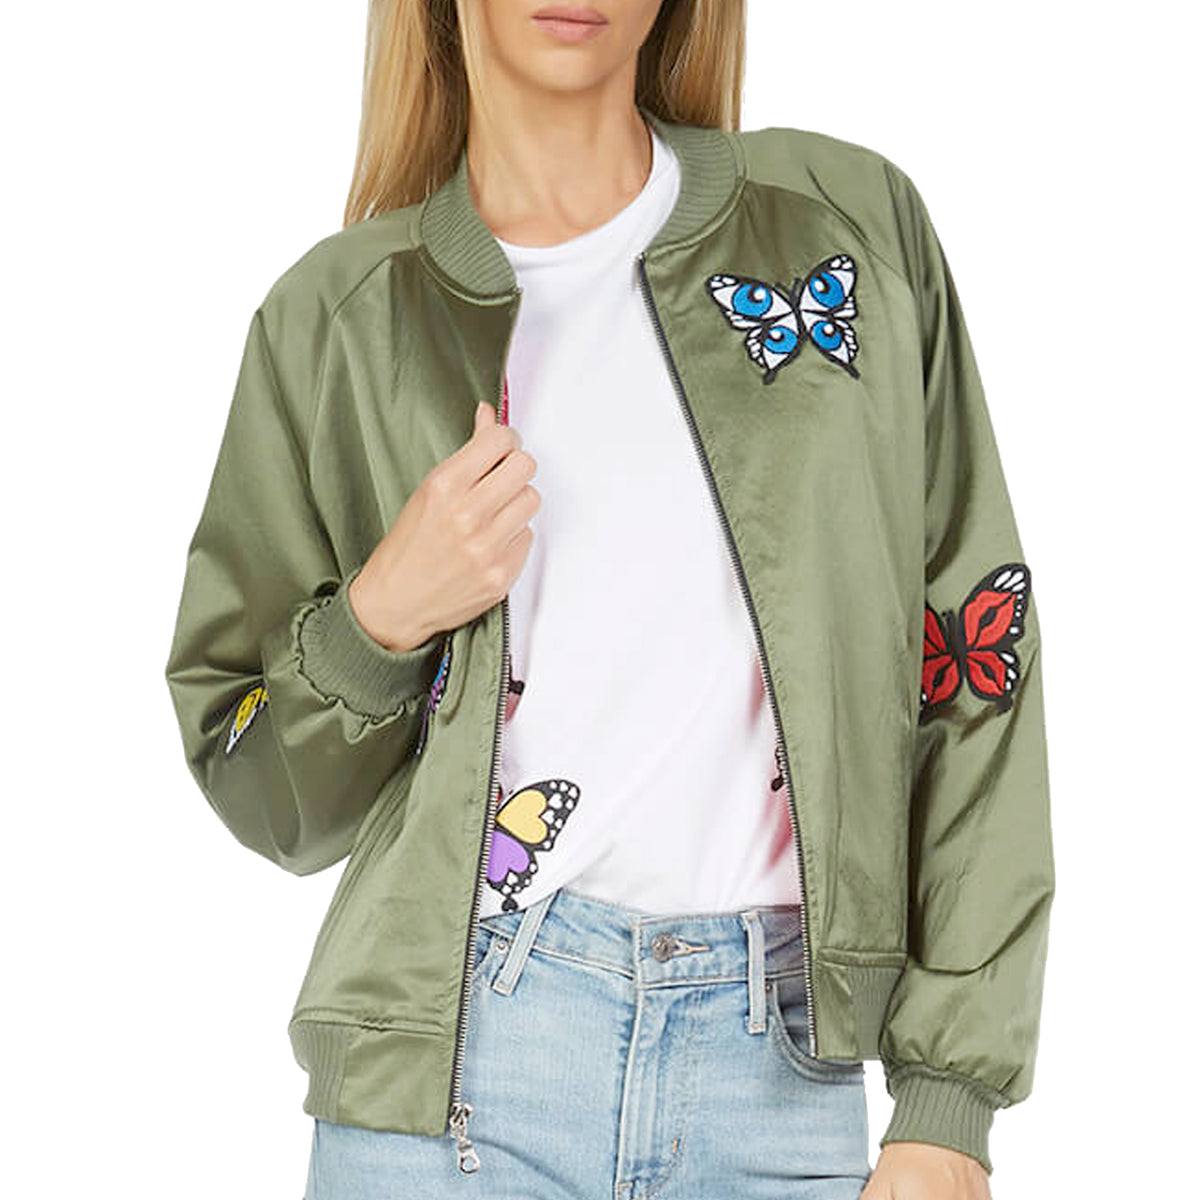 Levelle Butterfly Patches Bomber Jacket, Lauren Moshi - RSVP Style